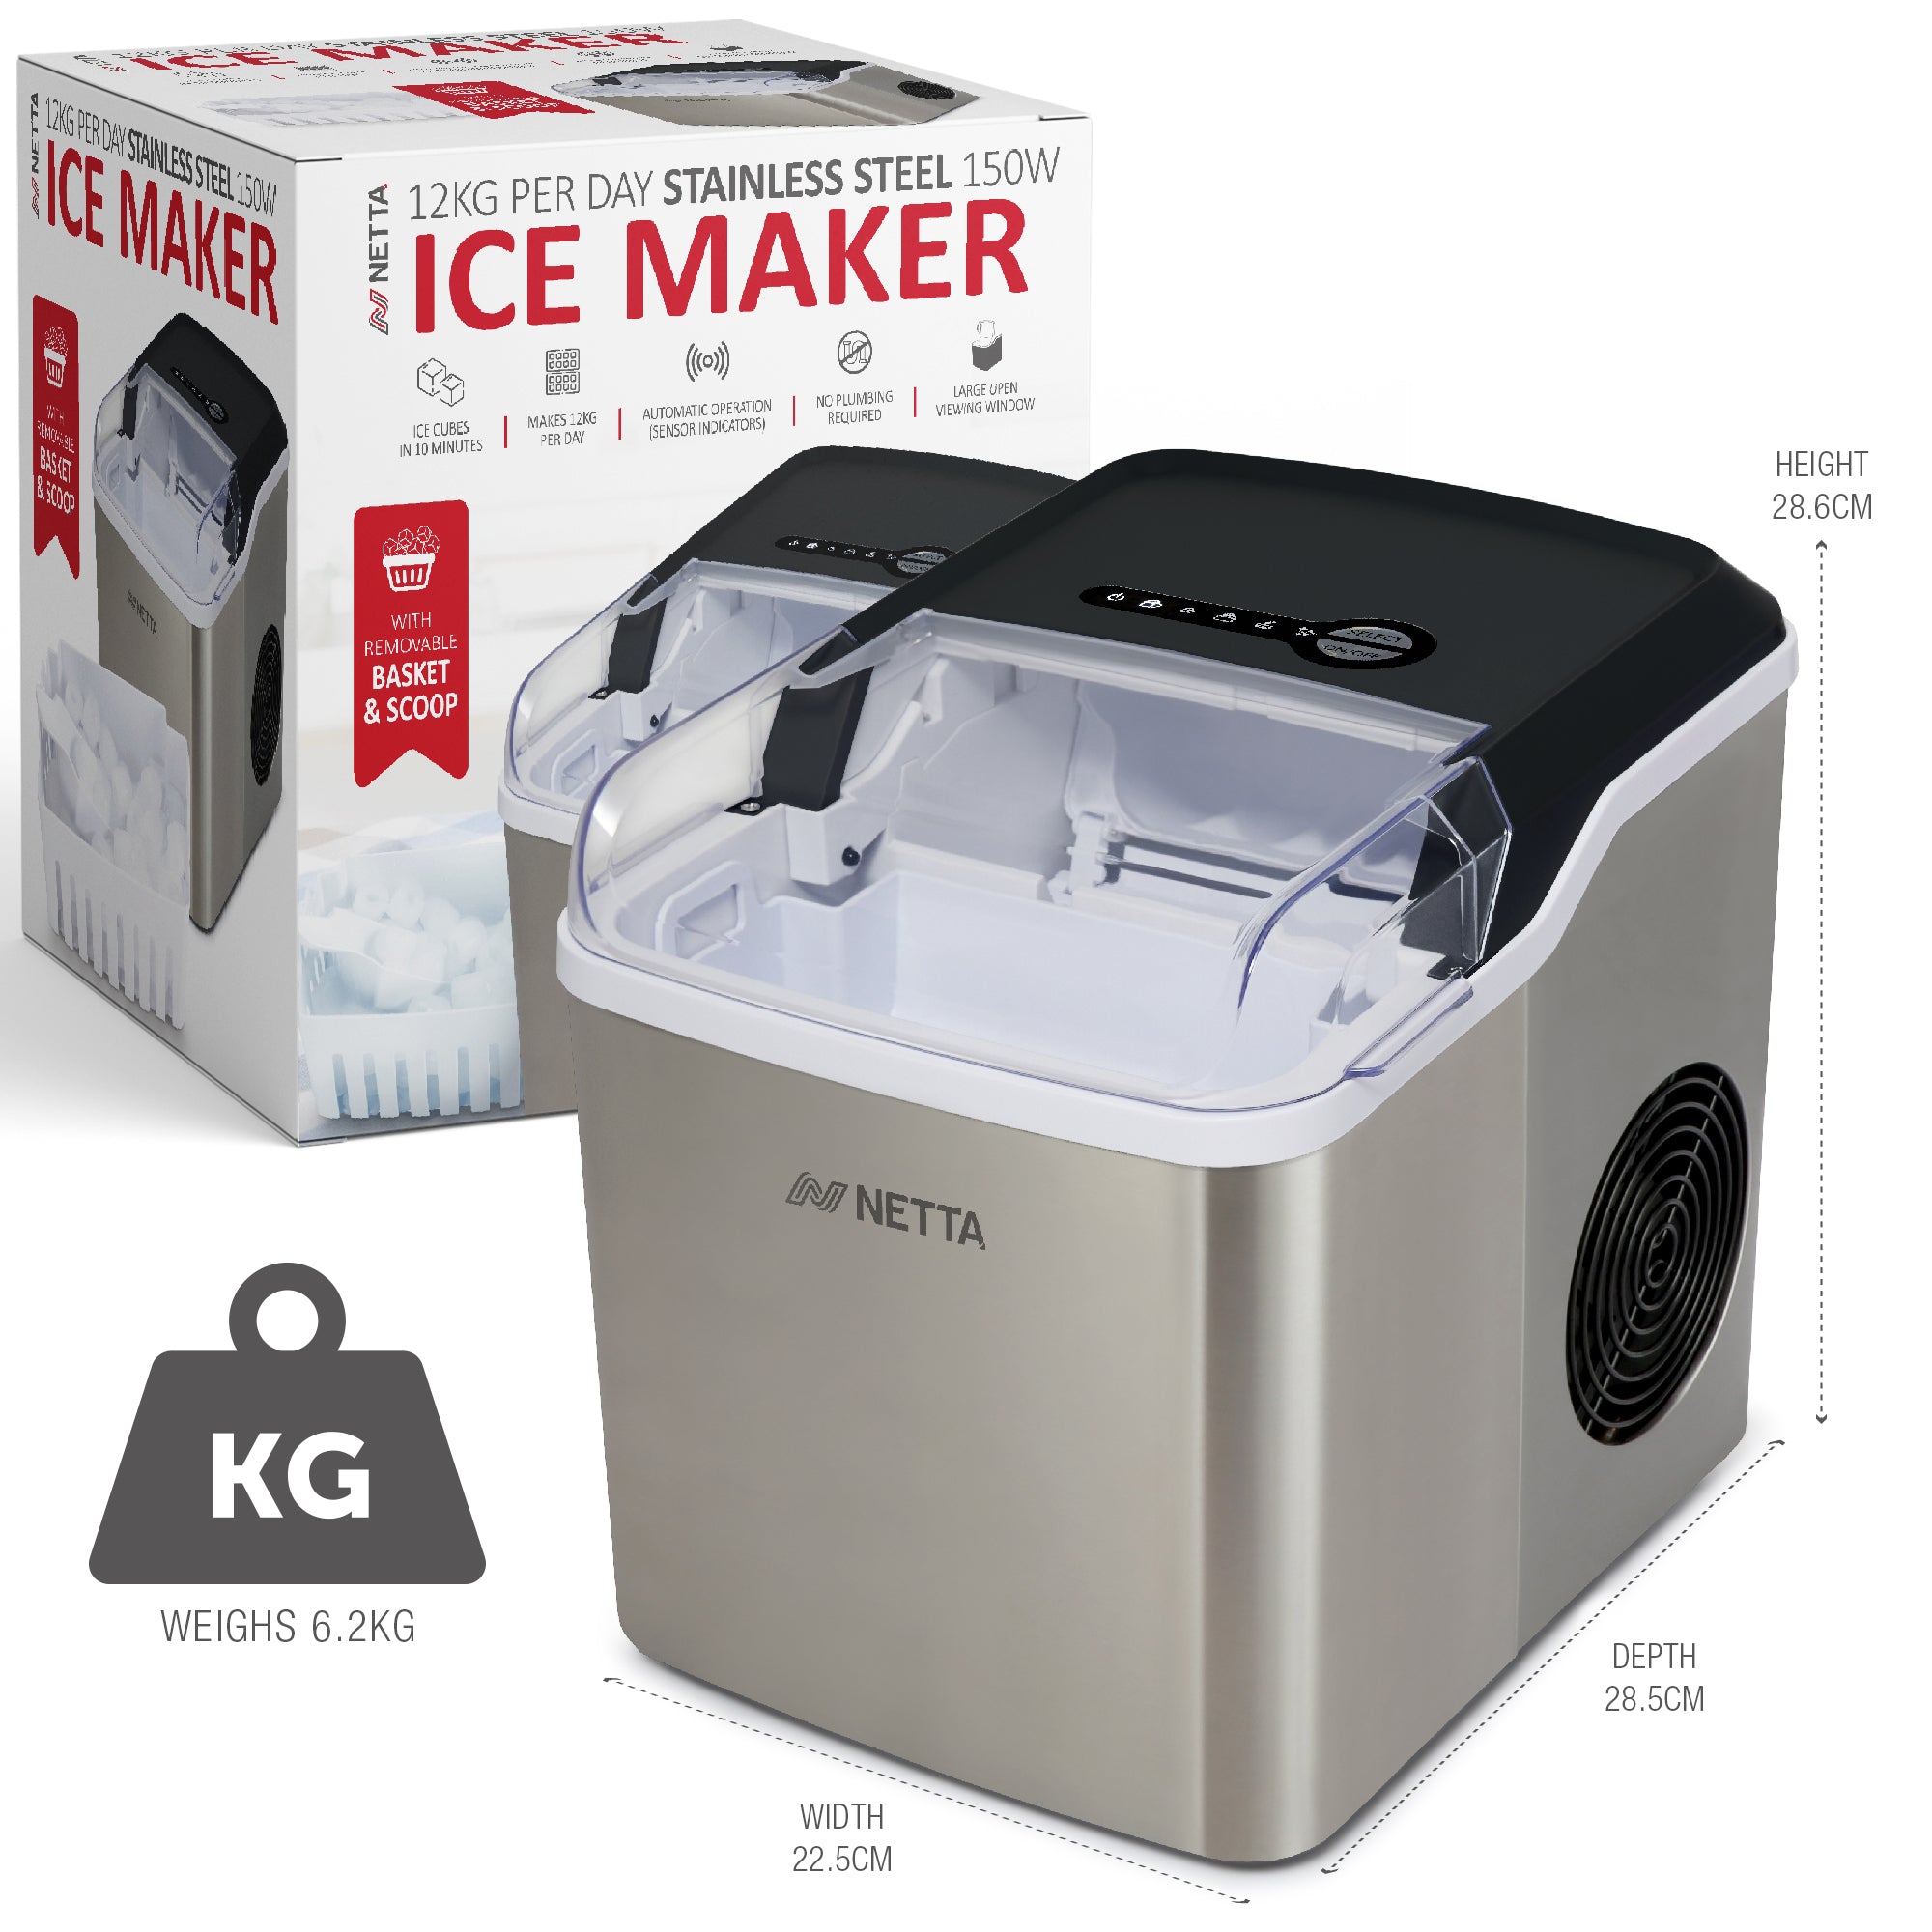 NETTA Ice Maker Machine with 1.2L Tank - Makes 12KG of Ice per Day